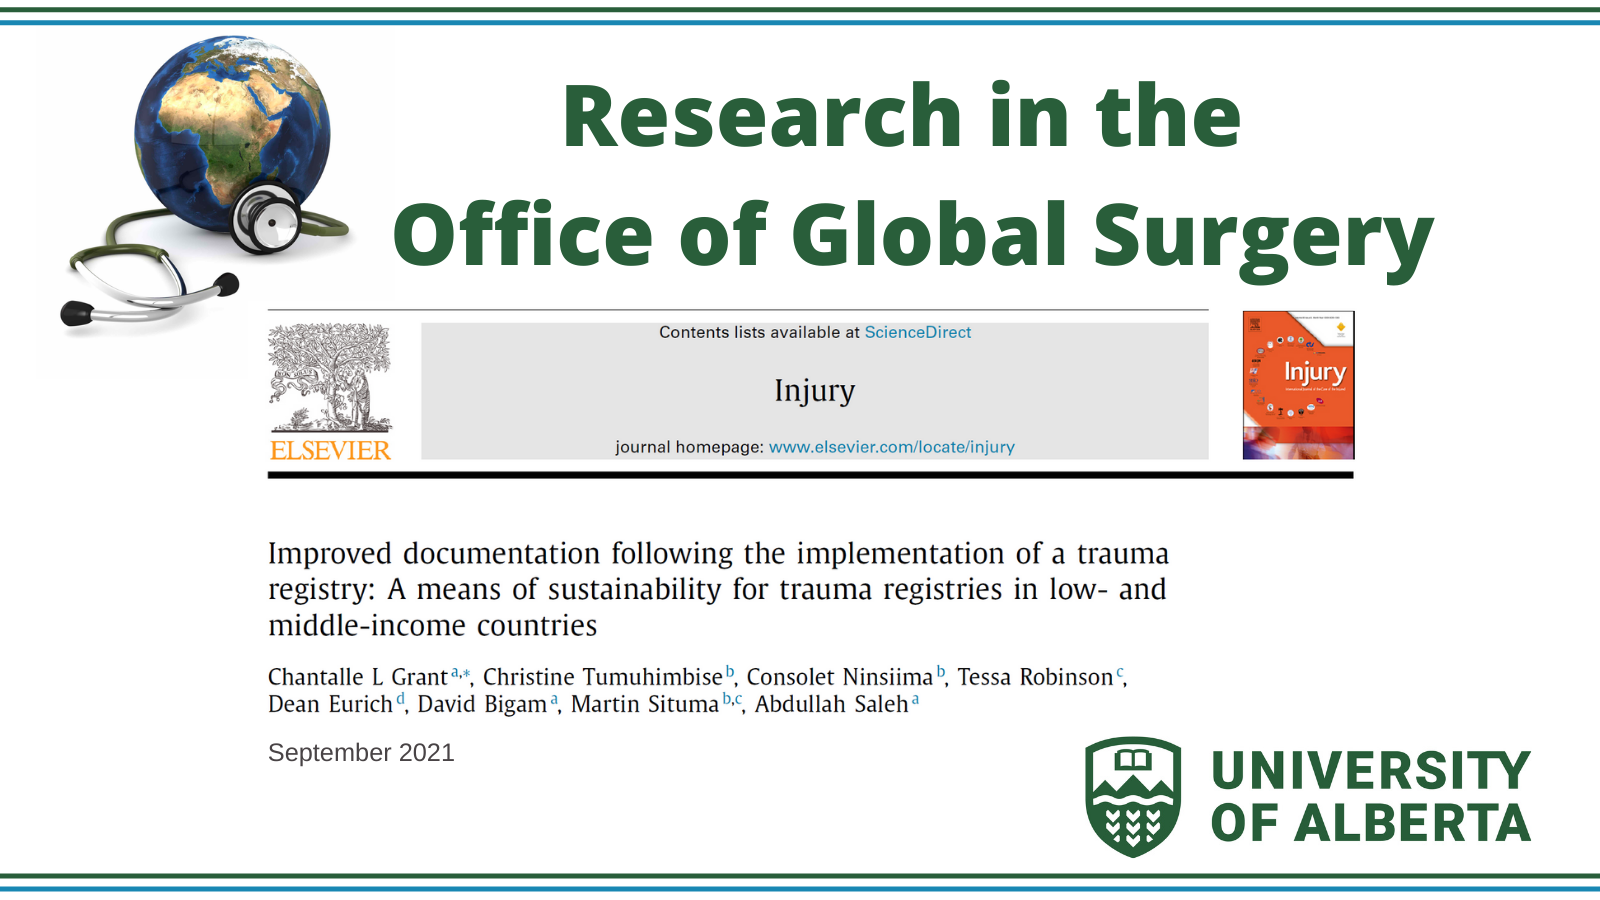 Improved documentation following the implementation of a trauma registry